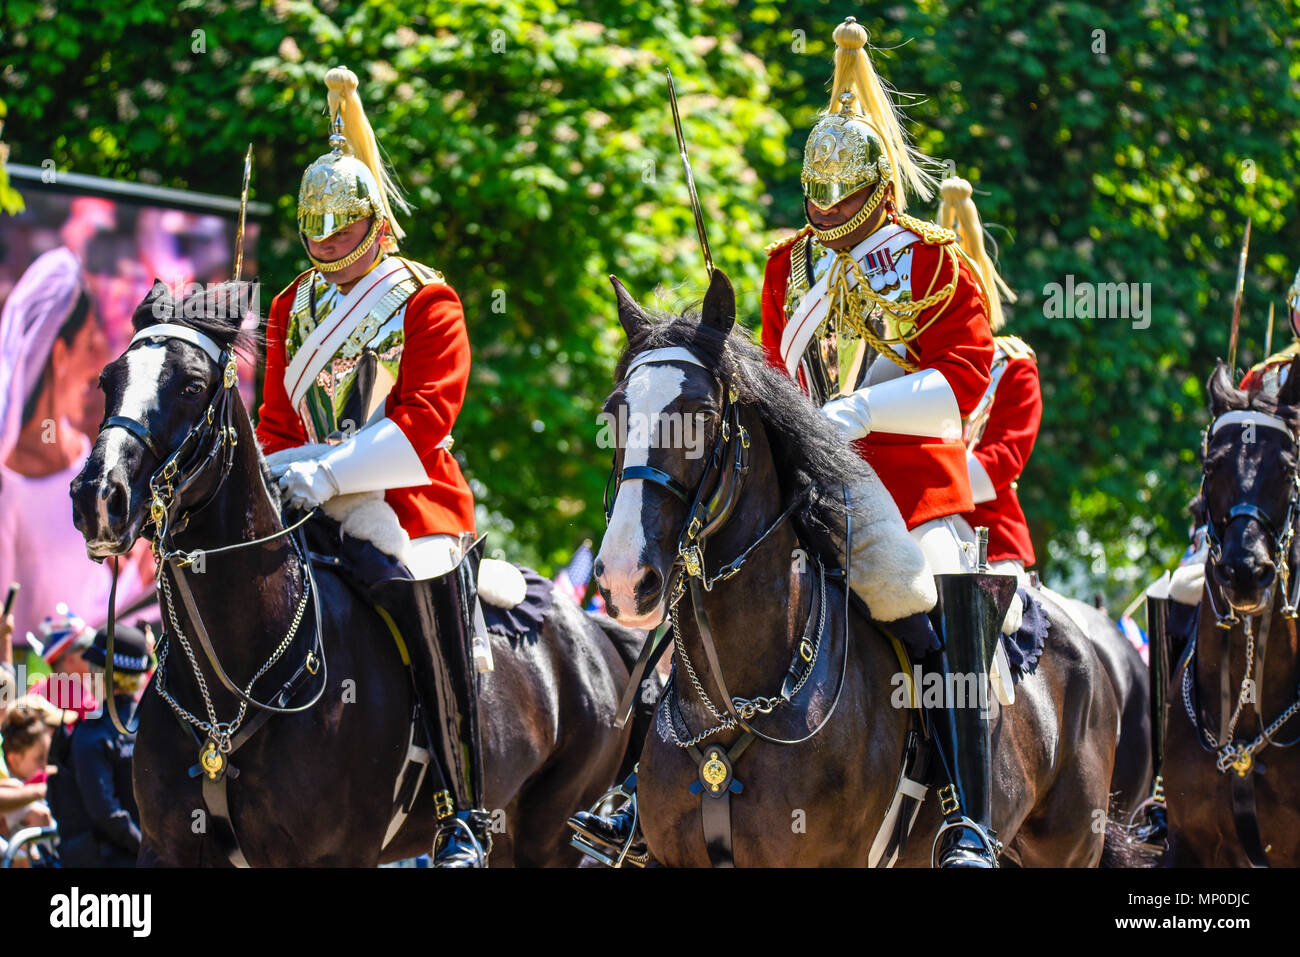 Royal Wedding. Riders of Life Guards, Household Cavalry leading the carriage procession along The Long Walk, Windsor Great Park, England. Stock Photo